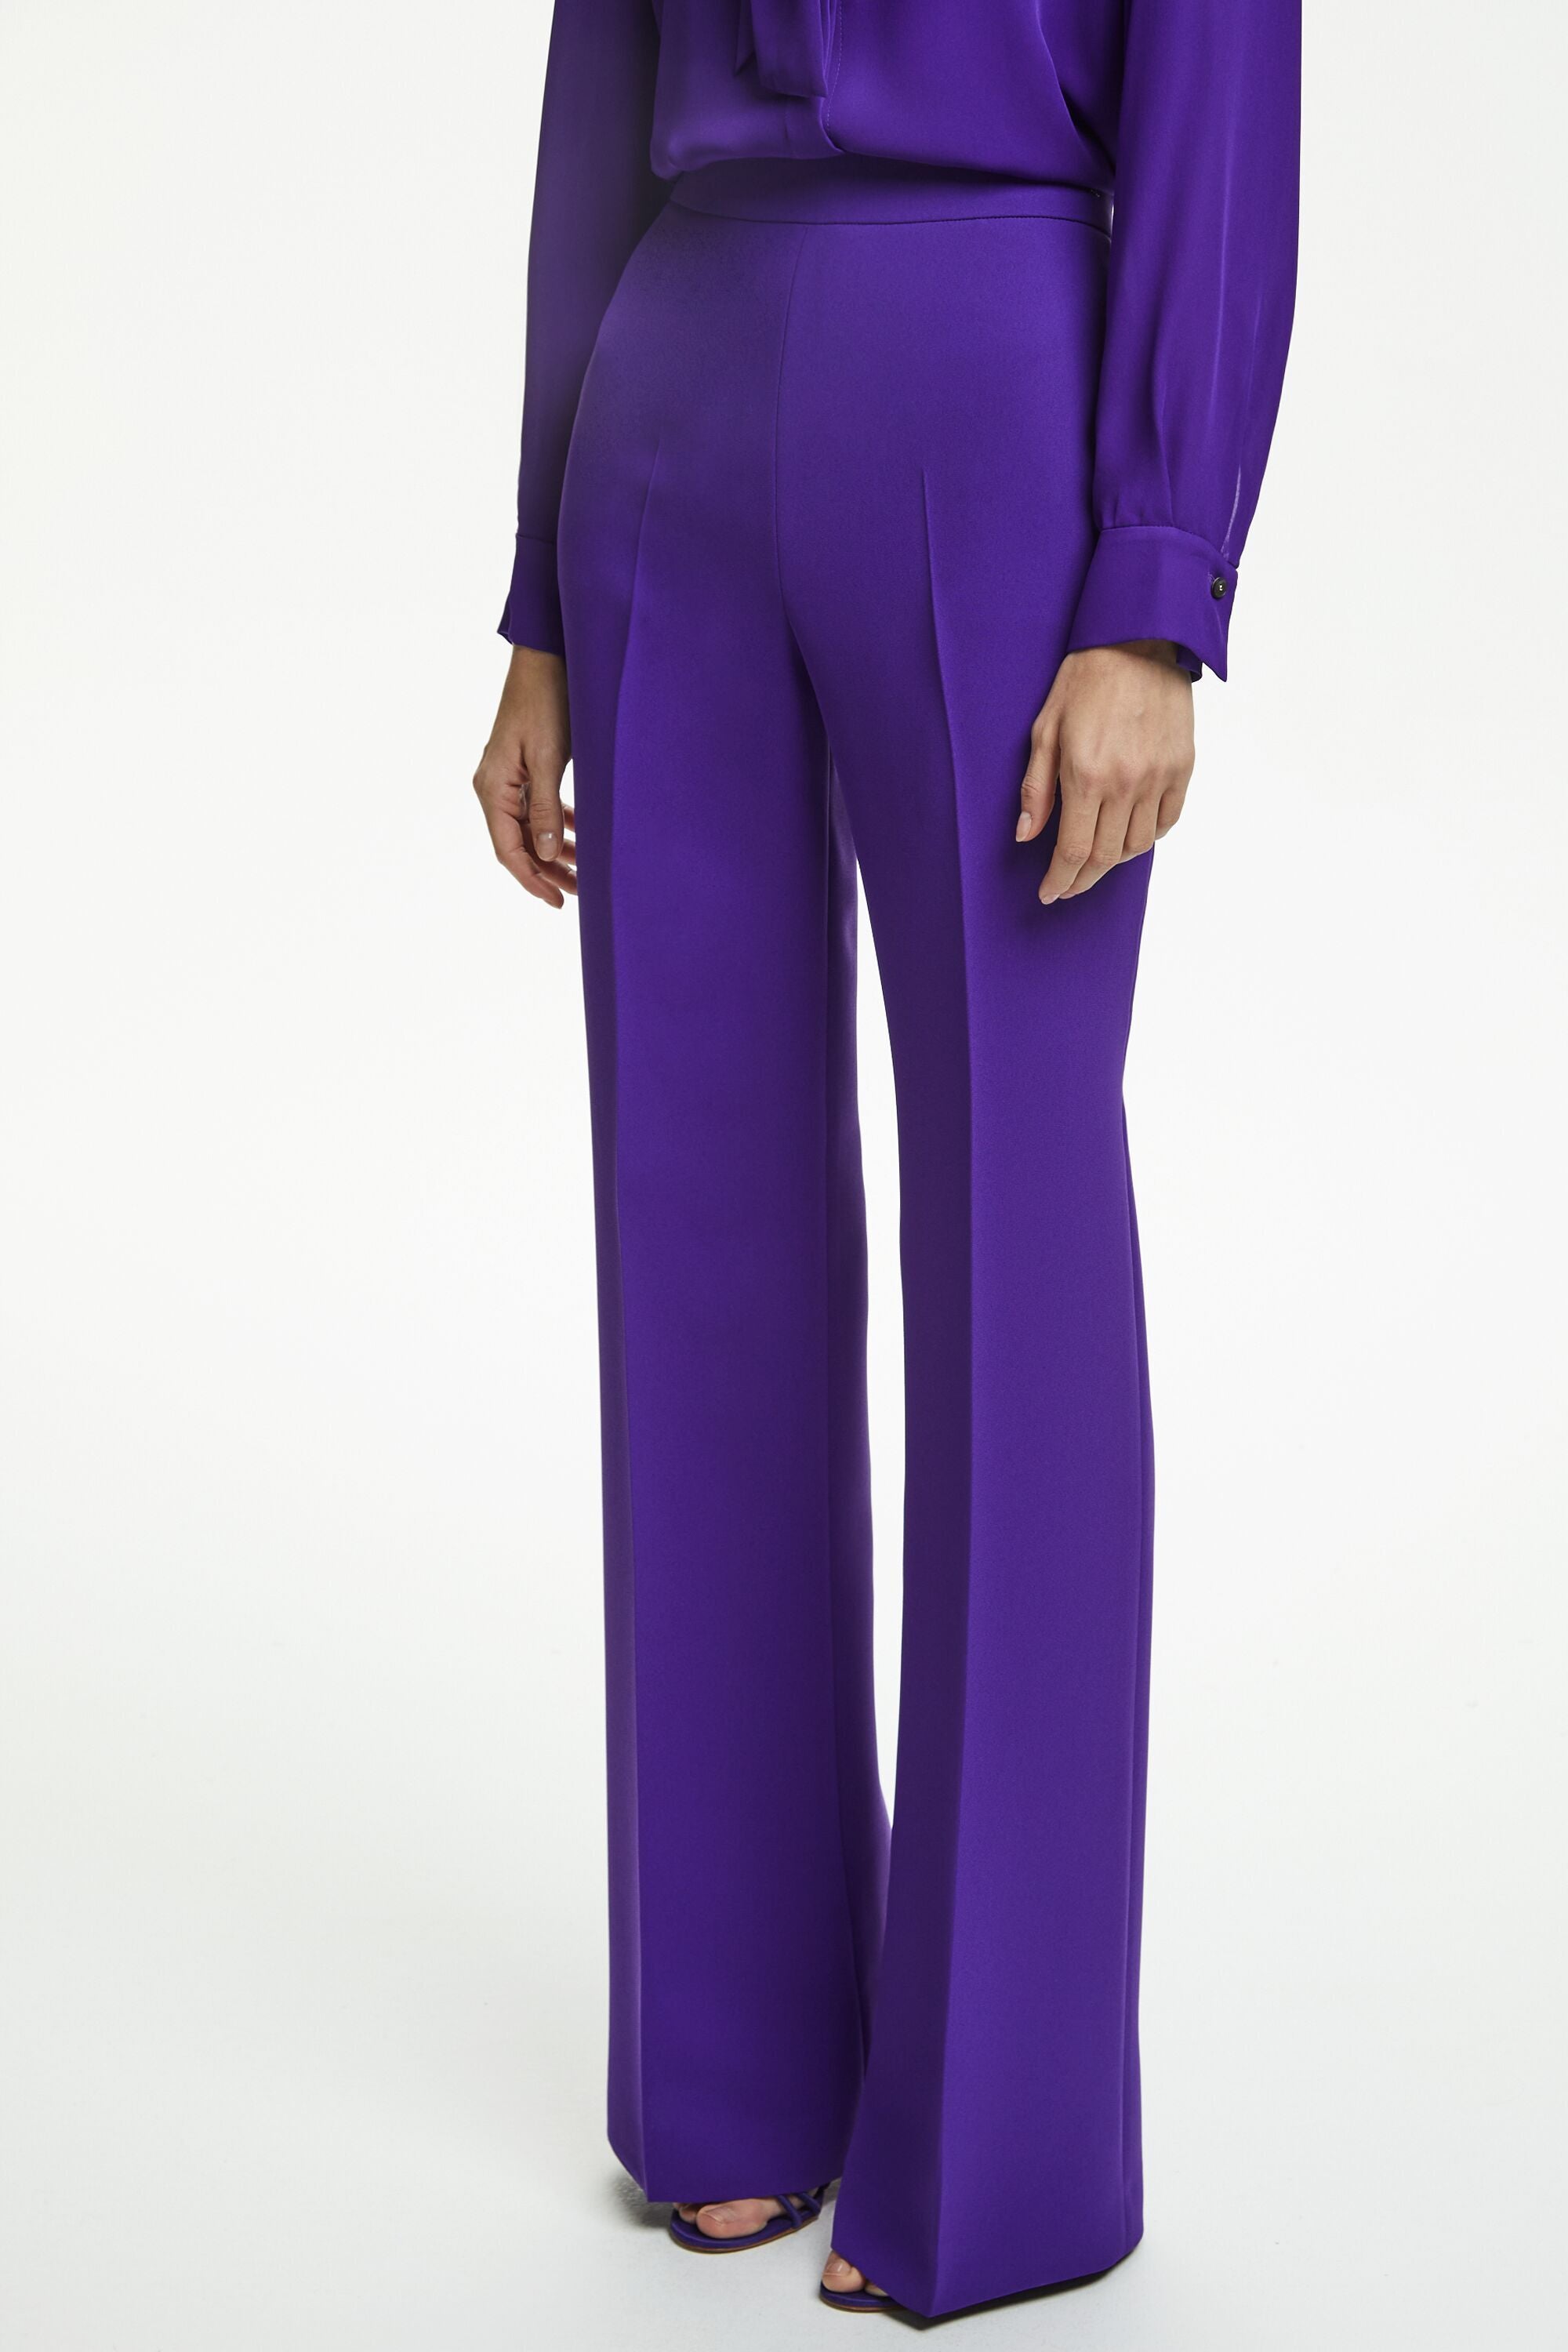 belper ベルパー grossy pleated pants purple | camillevieraservices.com